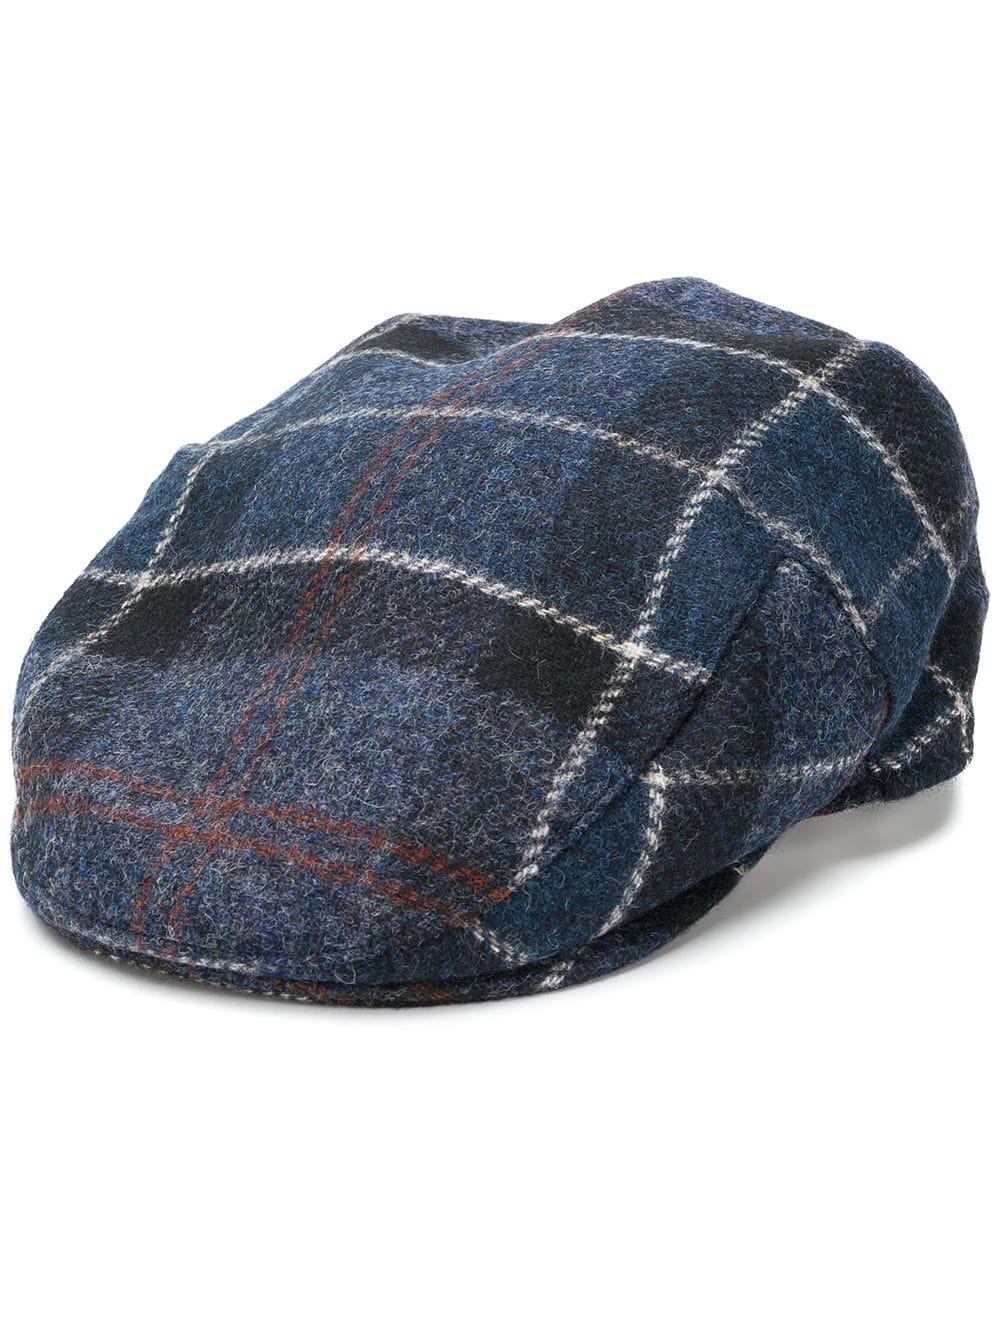 Barbour Synthetic Tweed Flat Cap in Blue for Men - Lyst